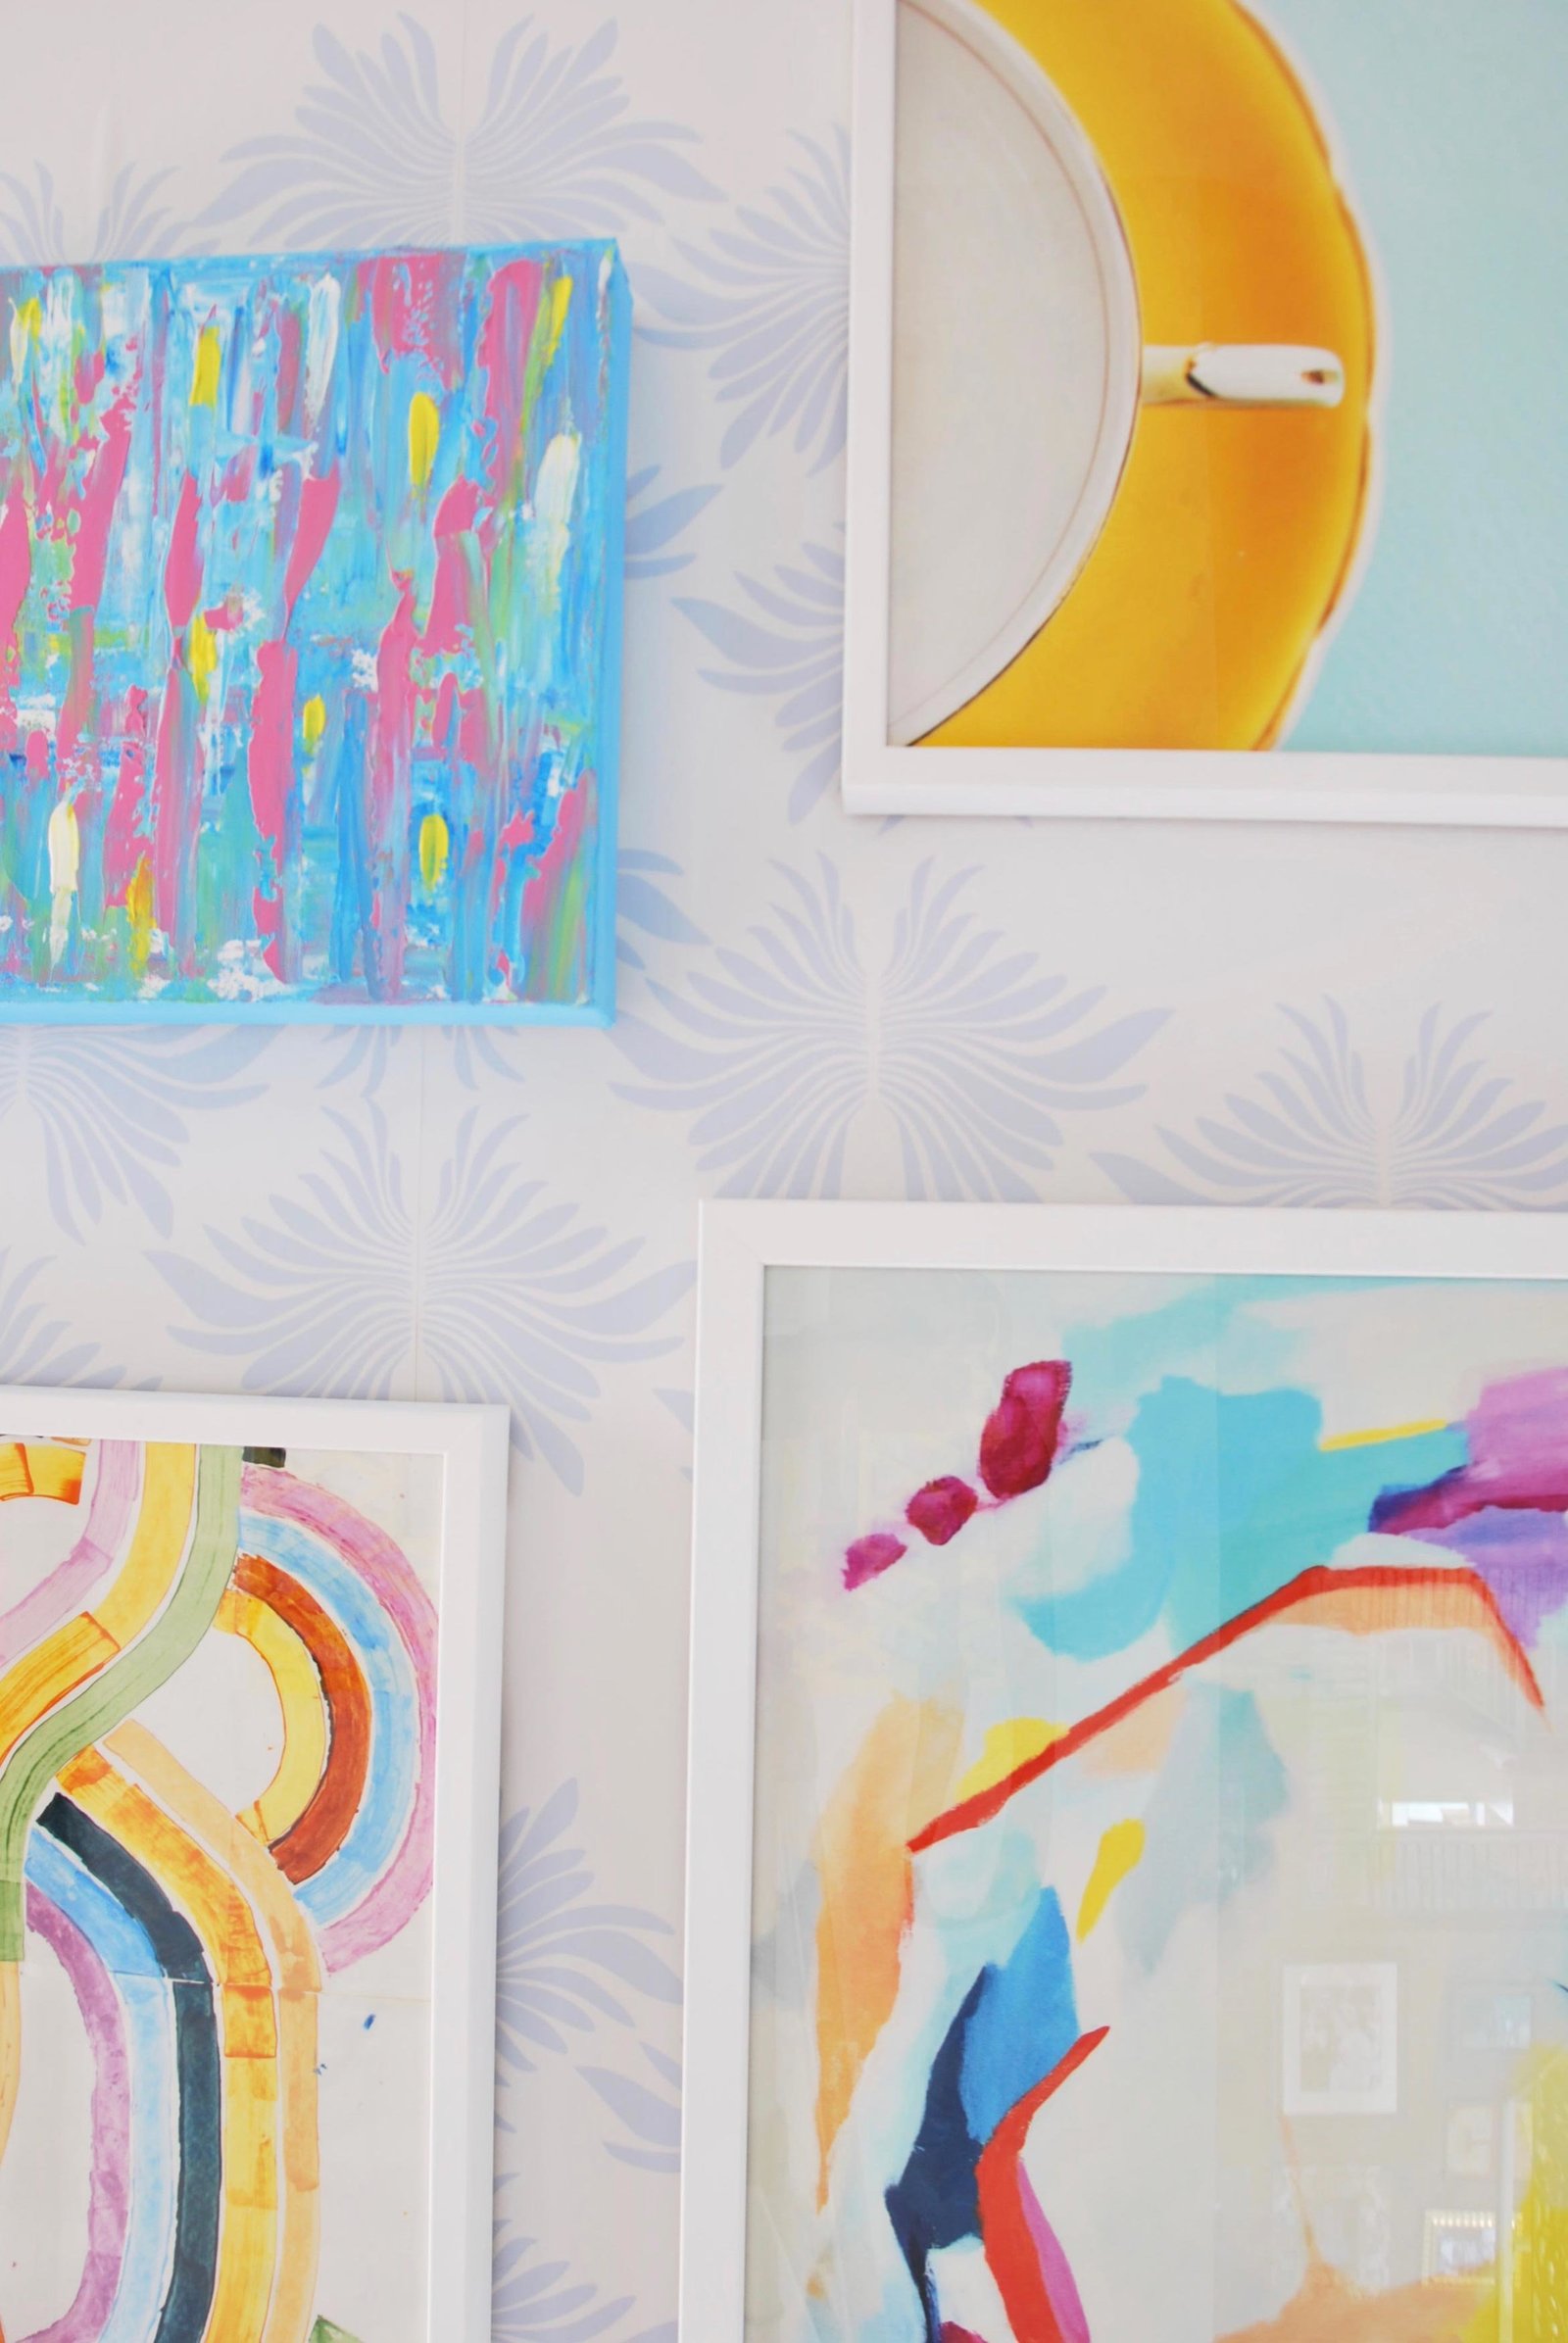 A colorful gallery wall of paintings in white frames.